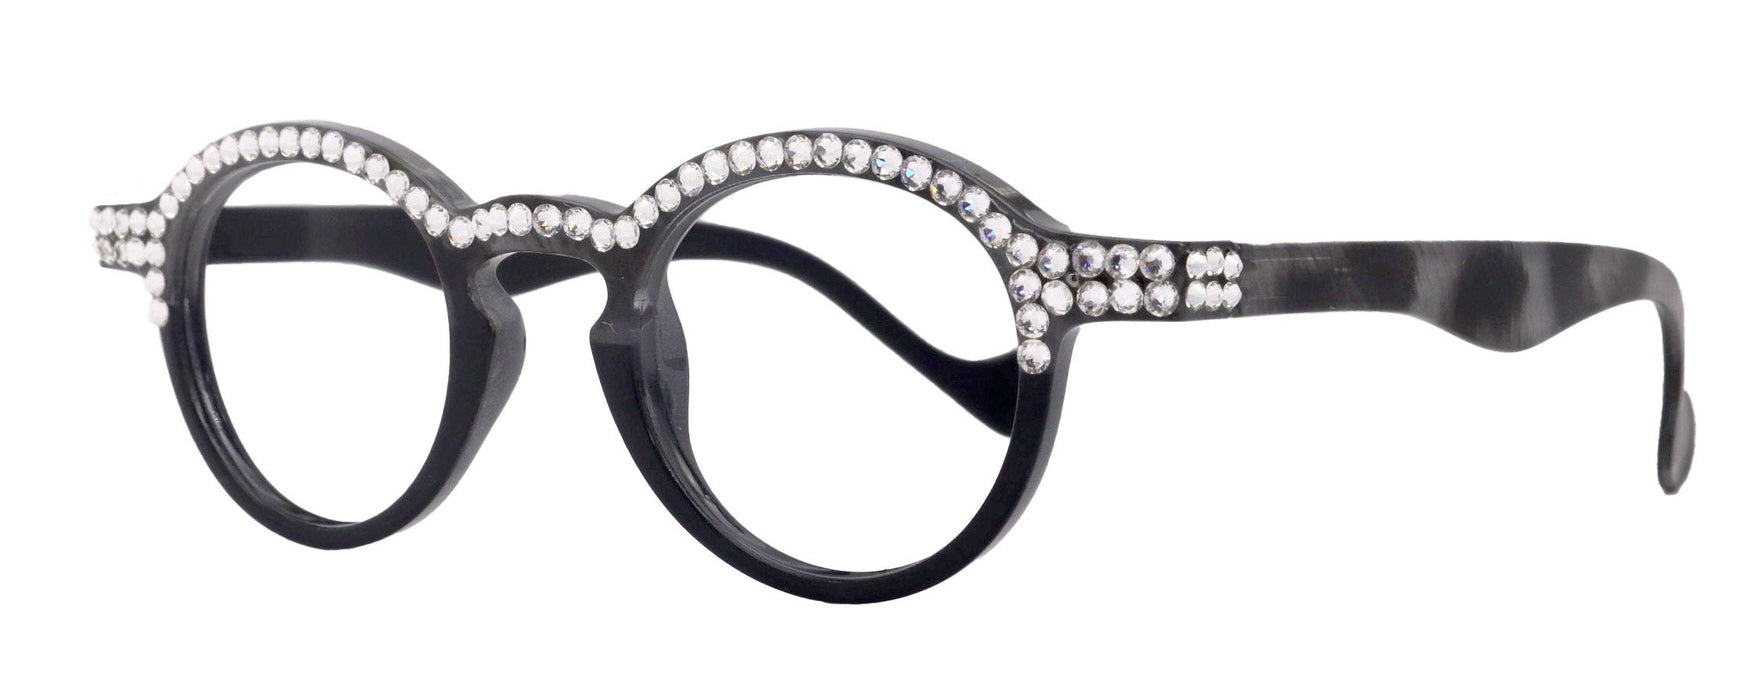 Orlando Bling Reading Glasses, W Full top Clear European crystals, Magnifying Eyeglasses, (Black) (Round) NY Fifth Avenue